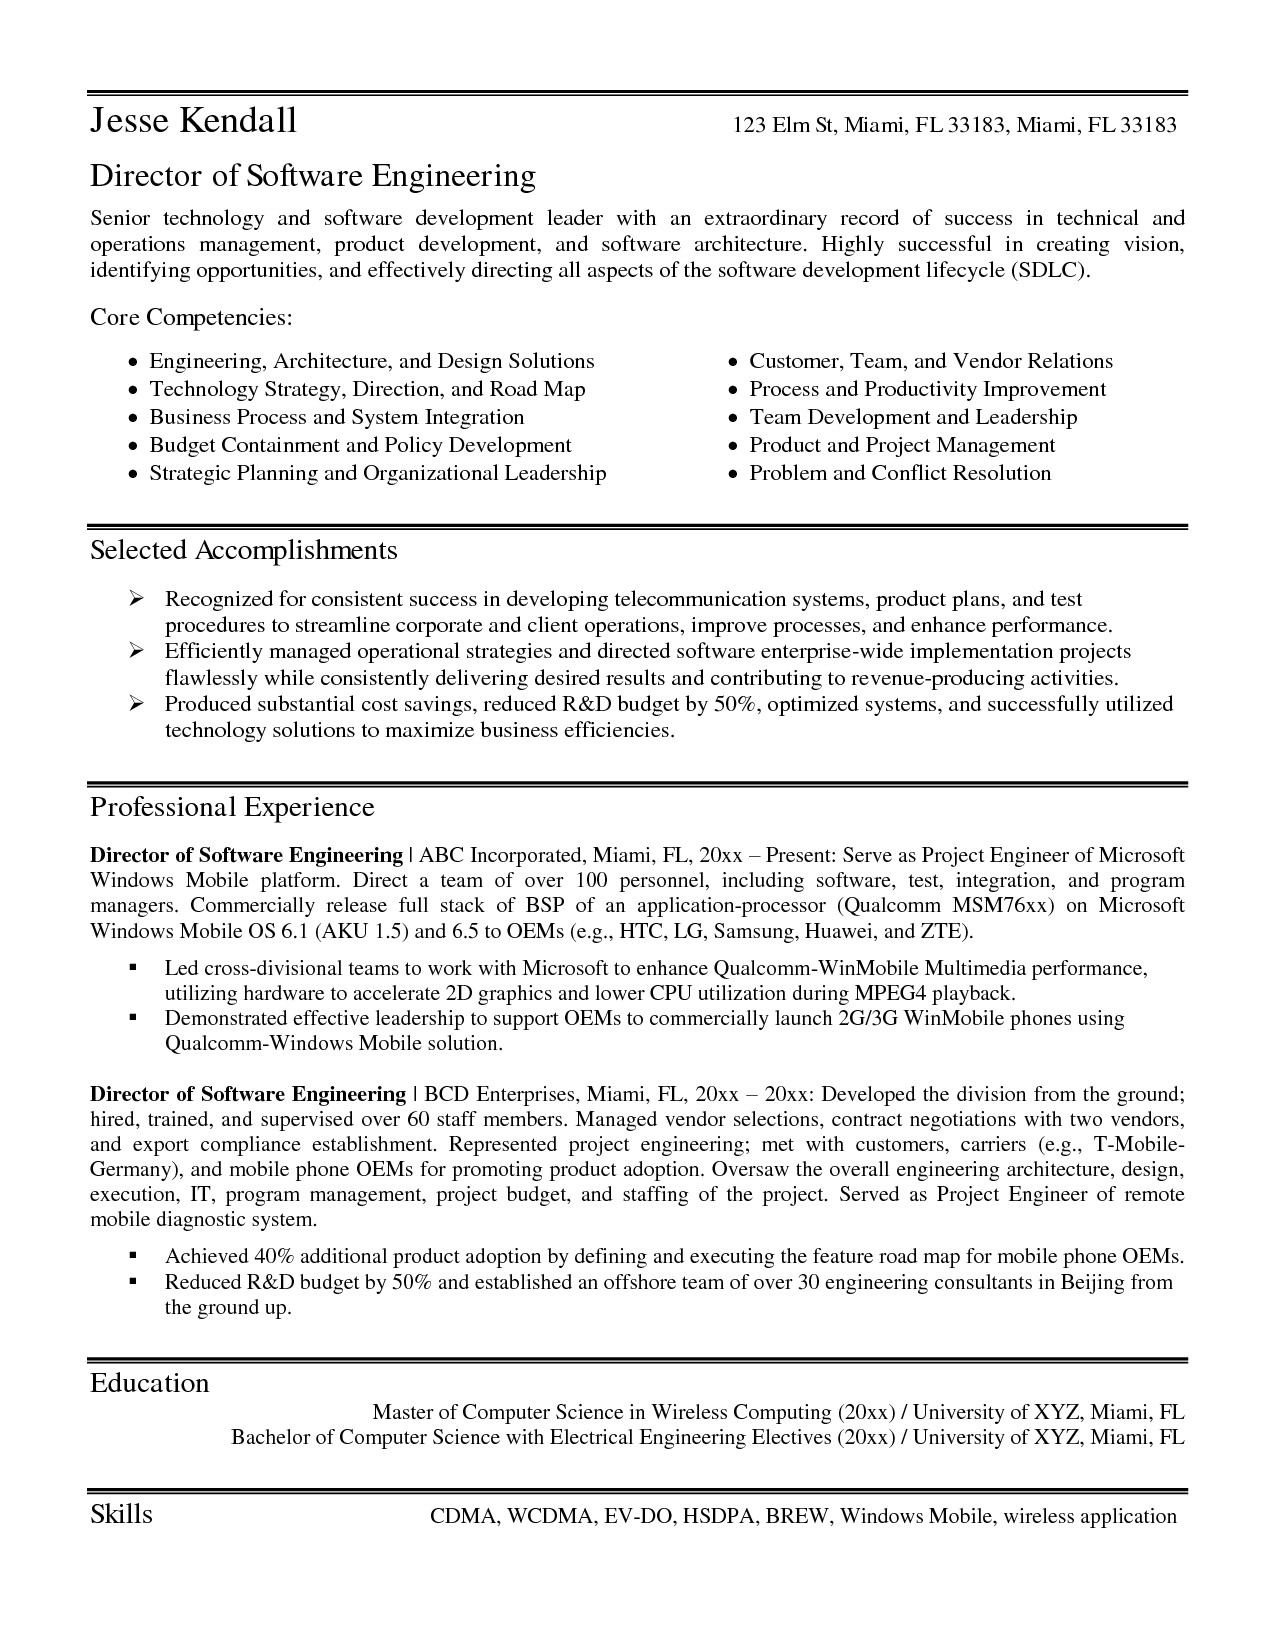 experienced resume samples for software engineers doc